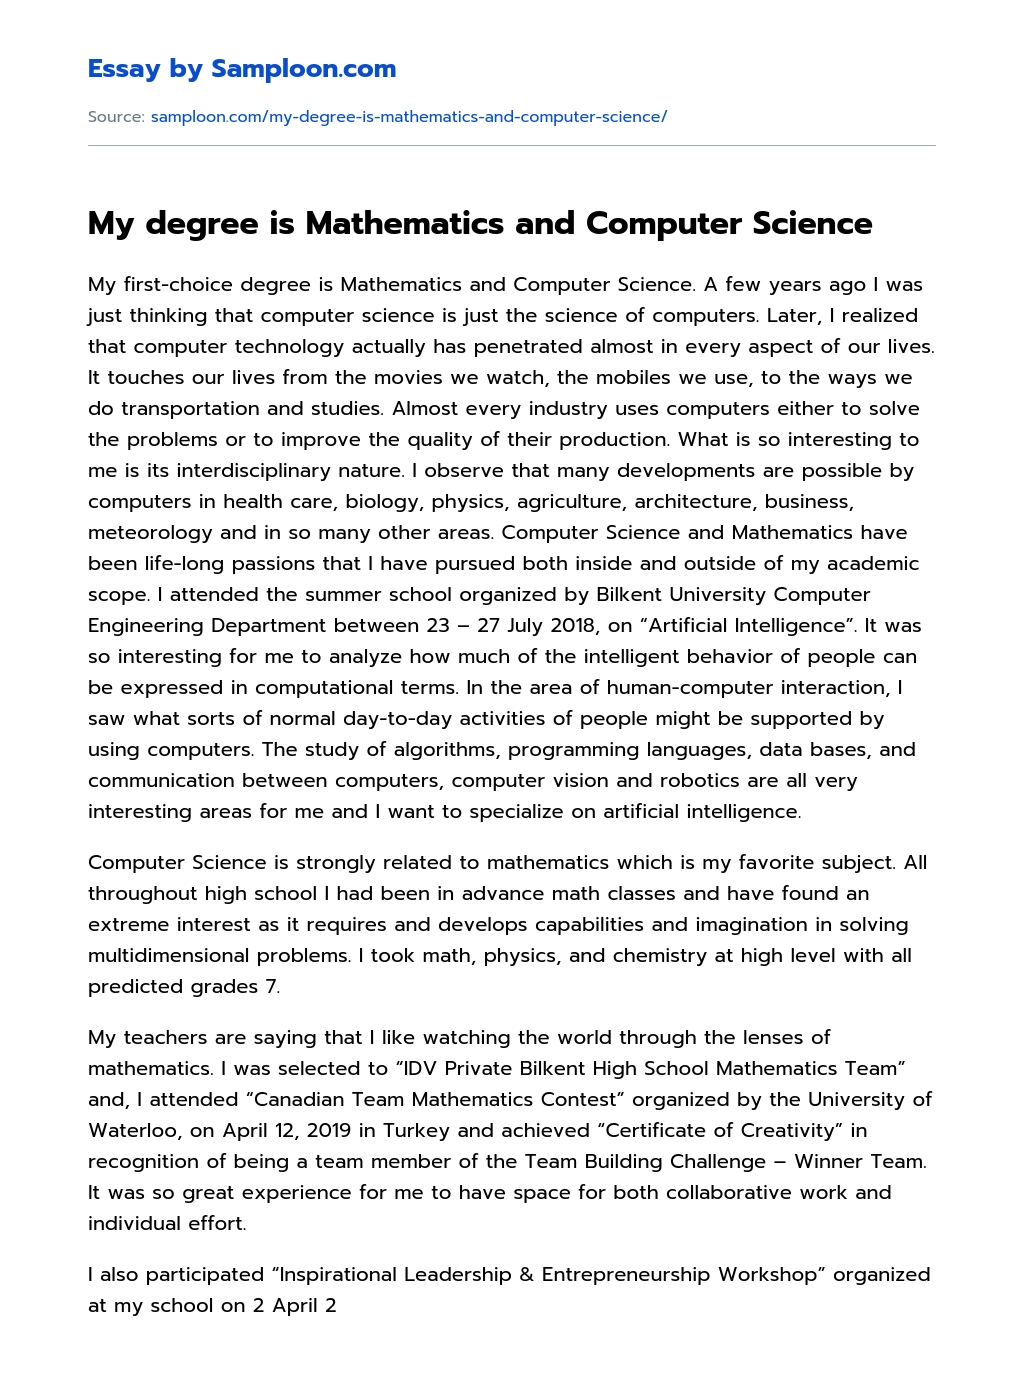 My degree is Mathematics and Computer Science essay